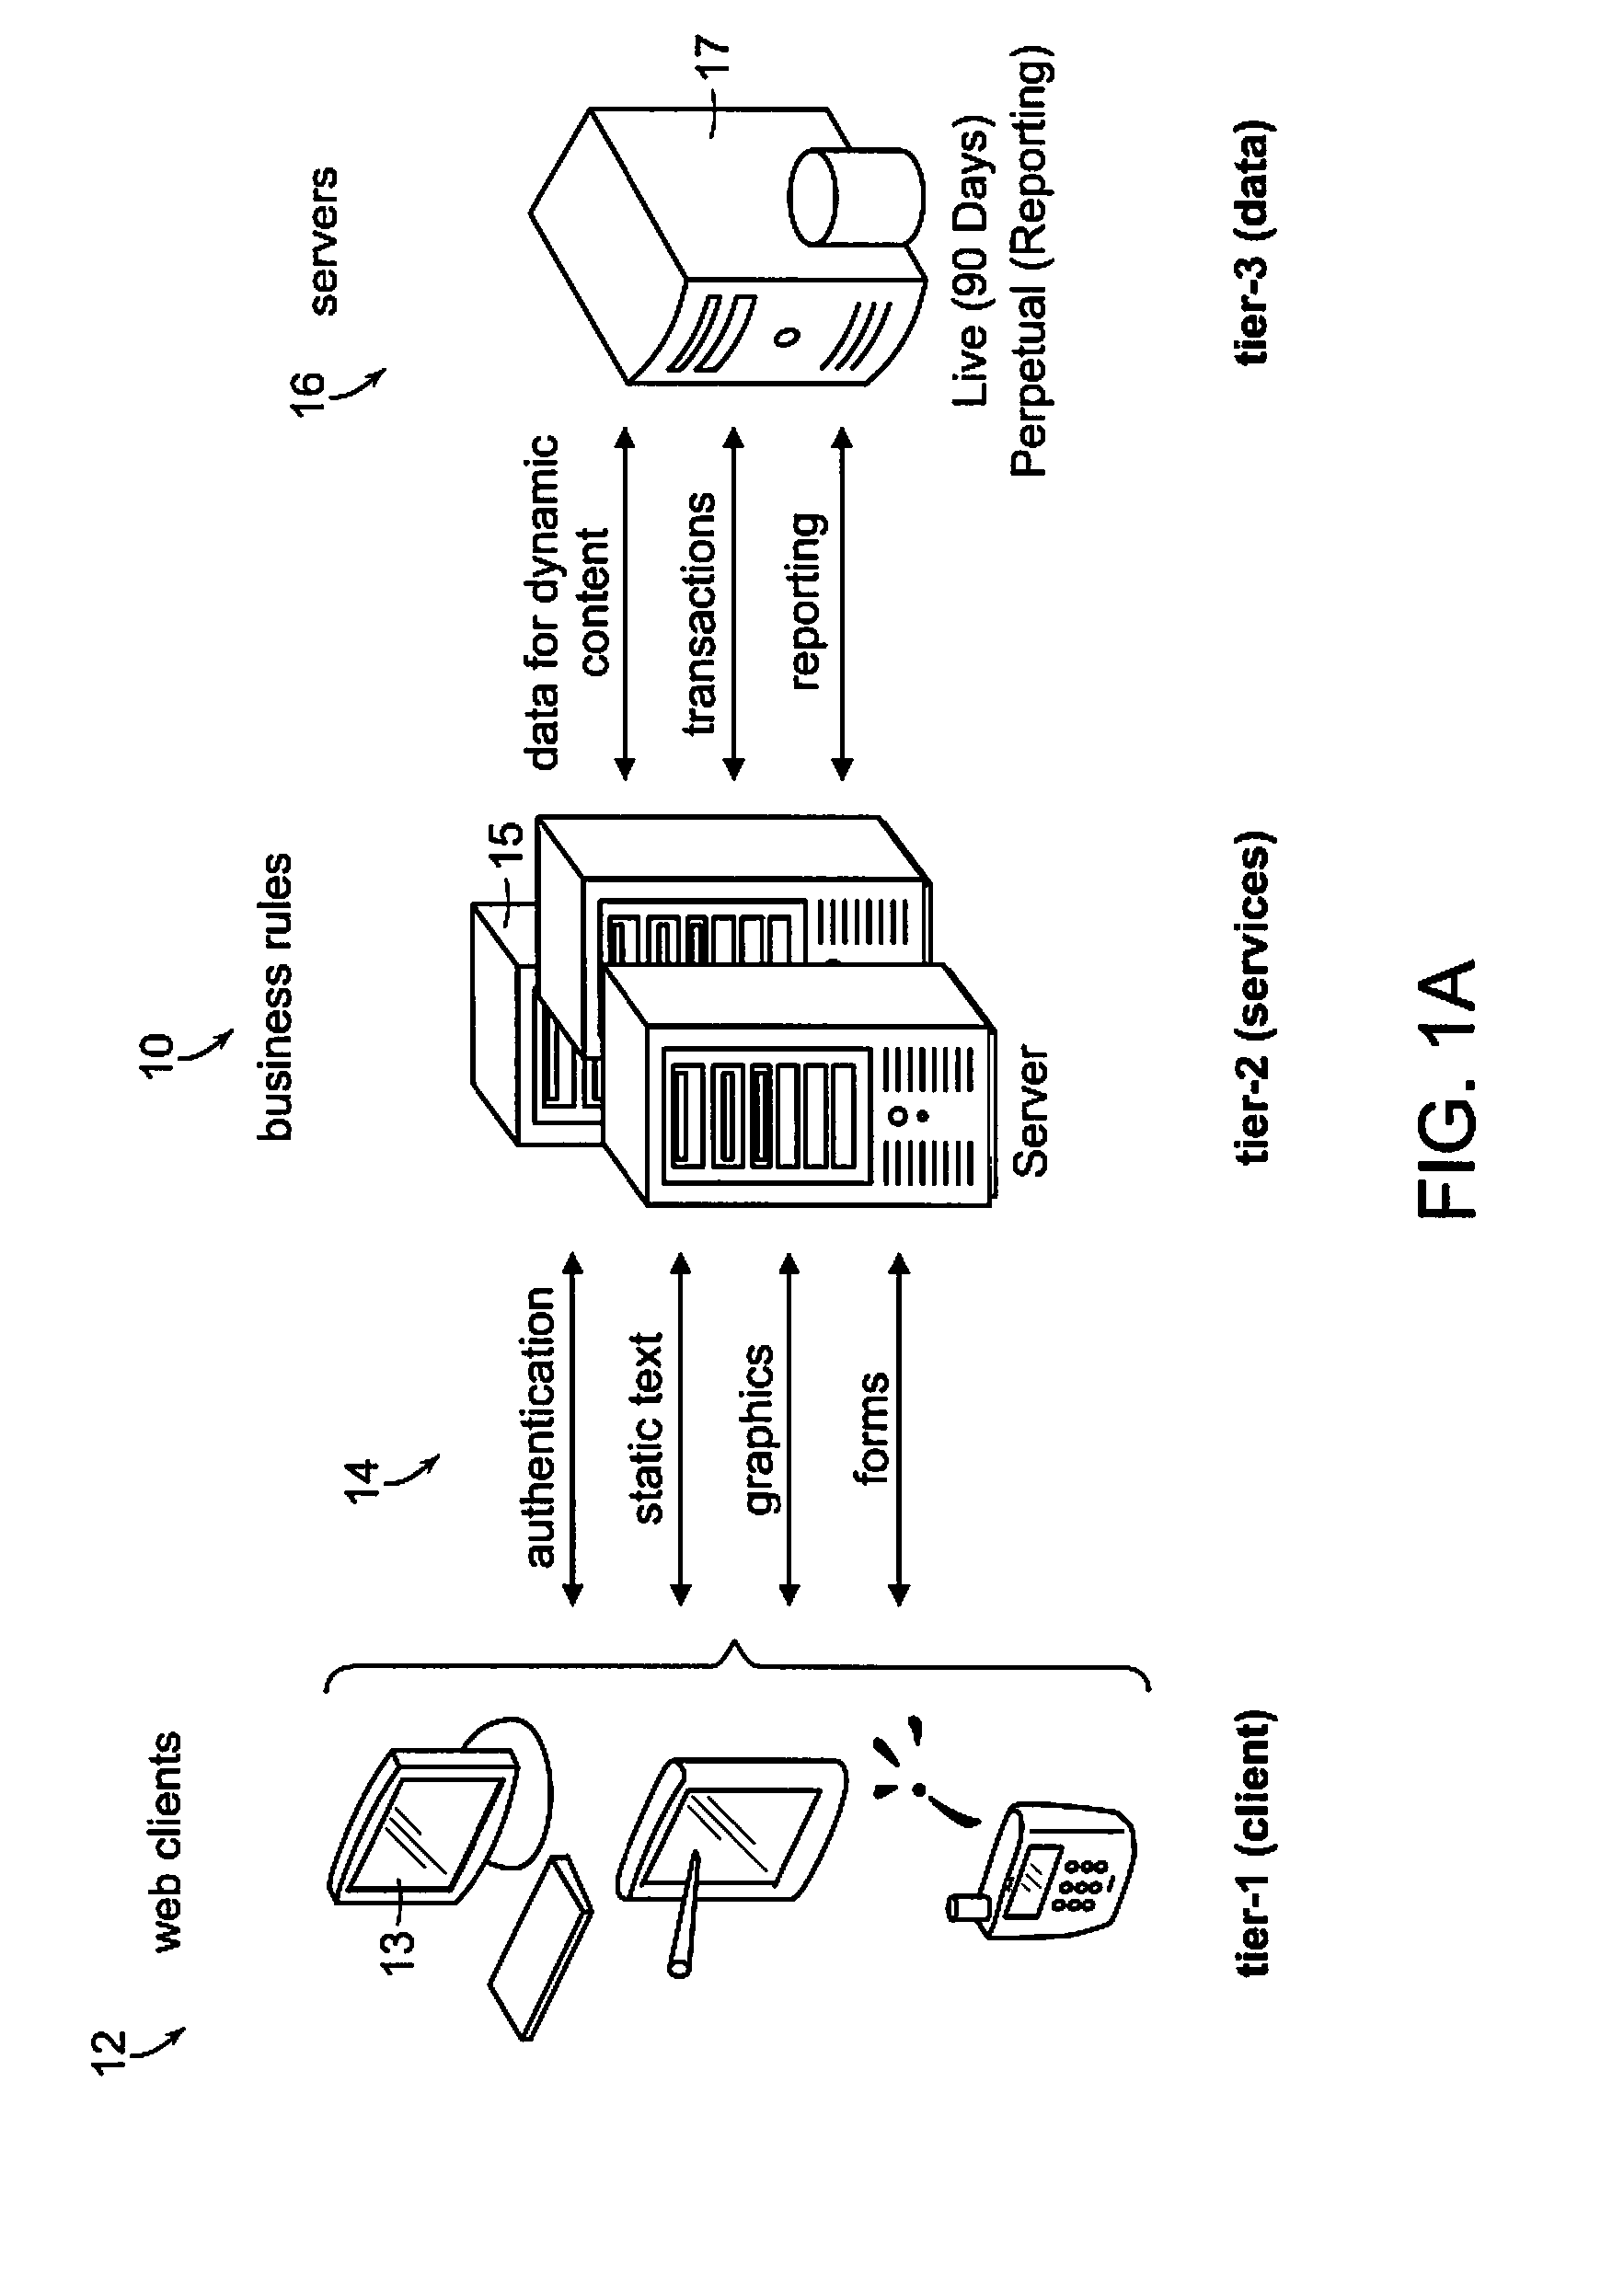 System and method for mortgage application recording